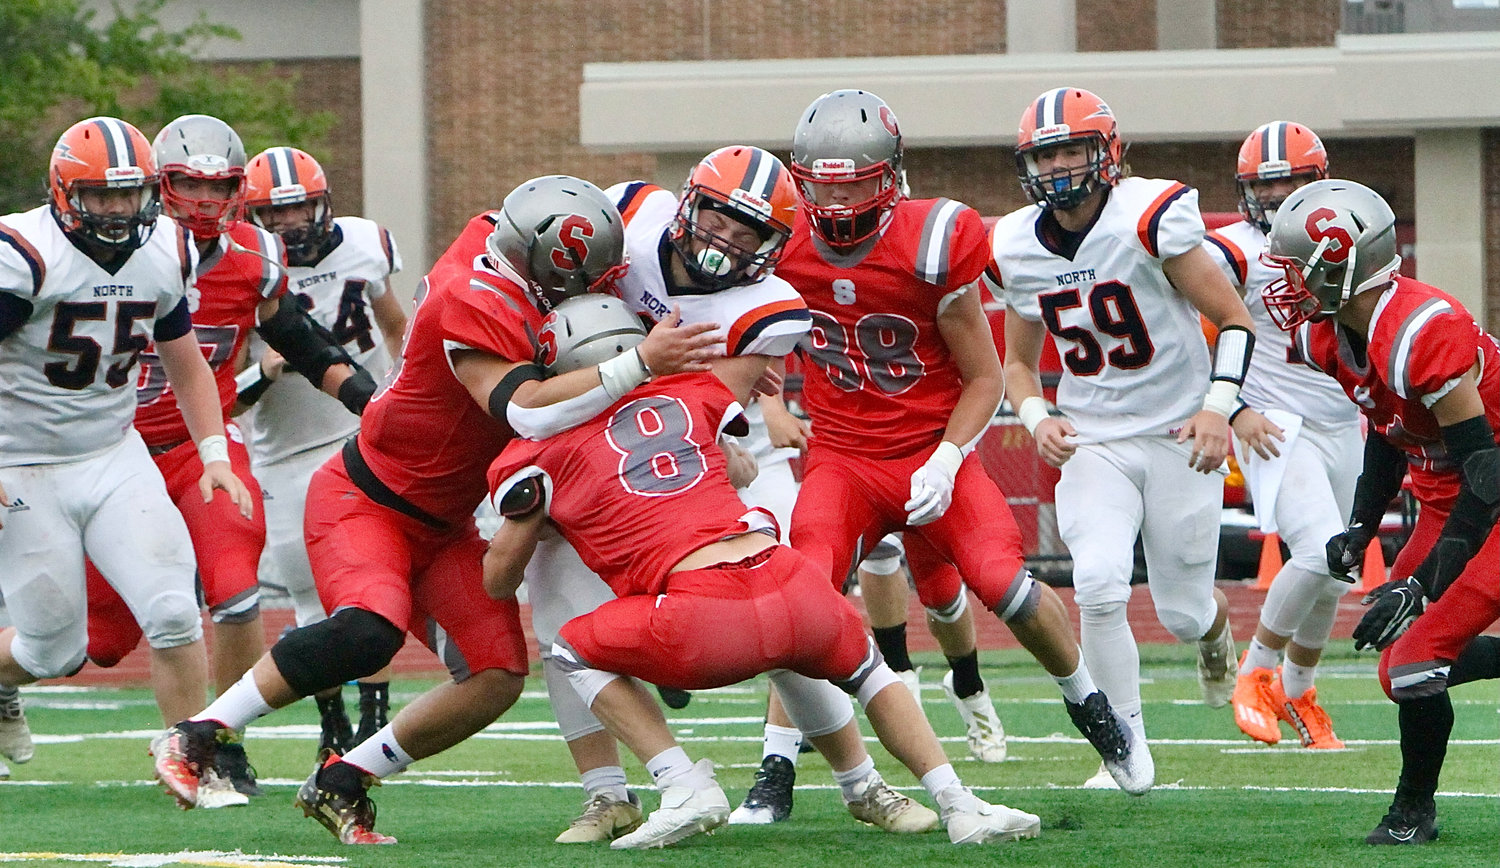 Southmont's defense bring down Charger quarterback Ross Dyson for a sack.